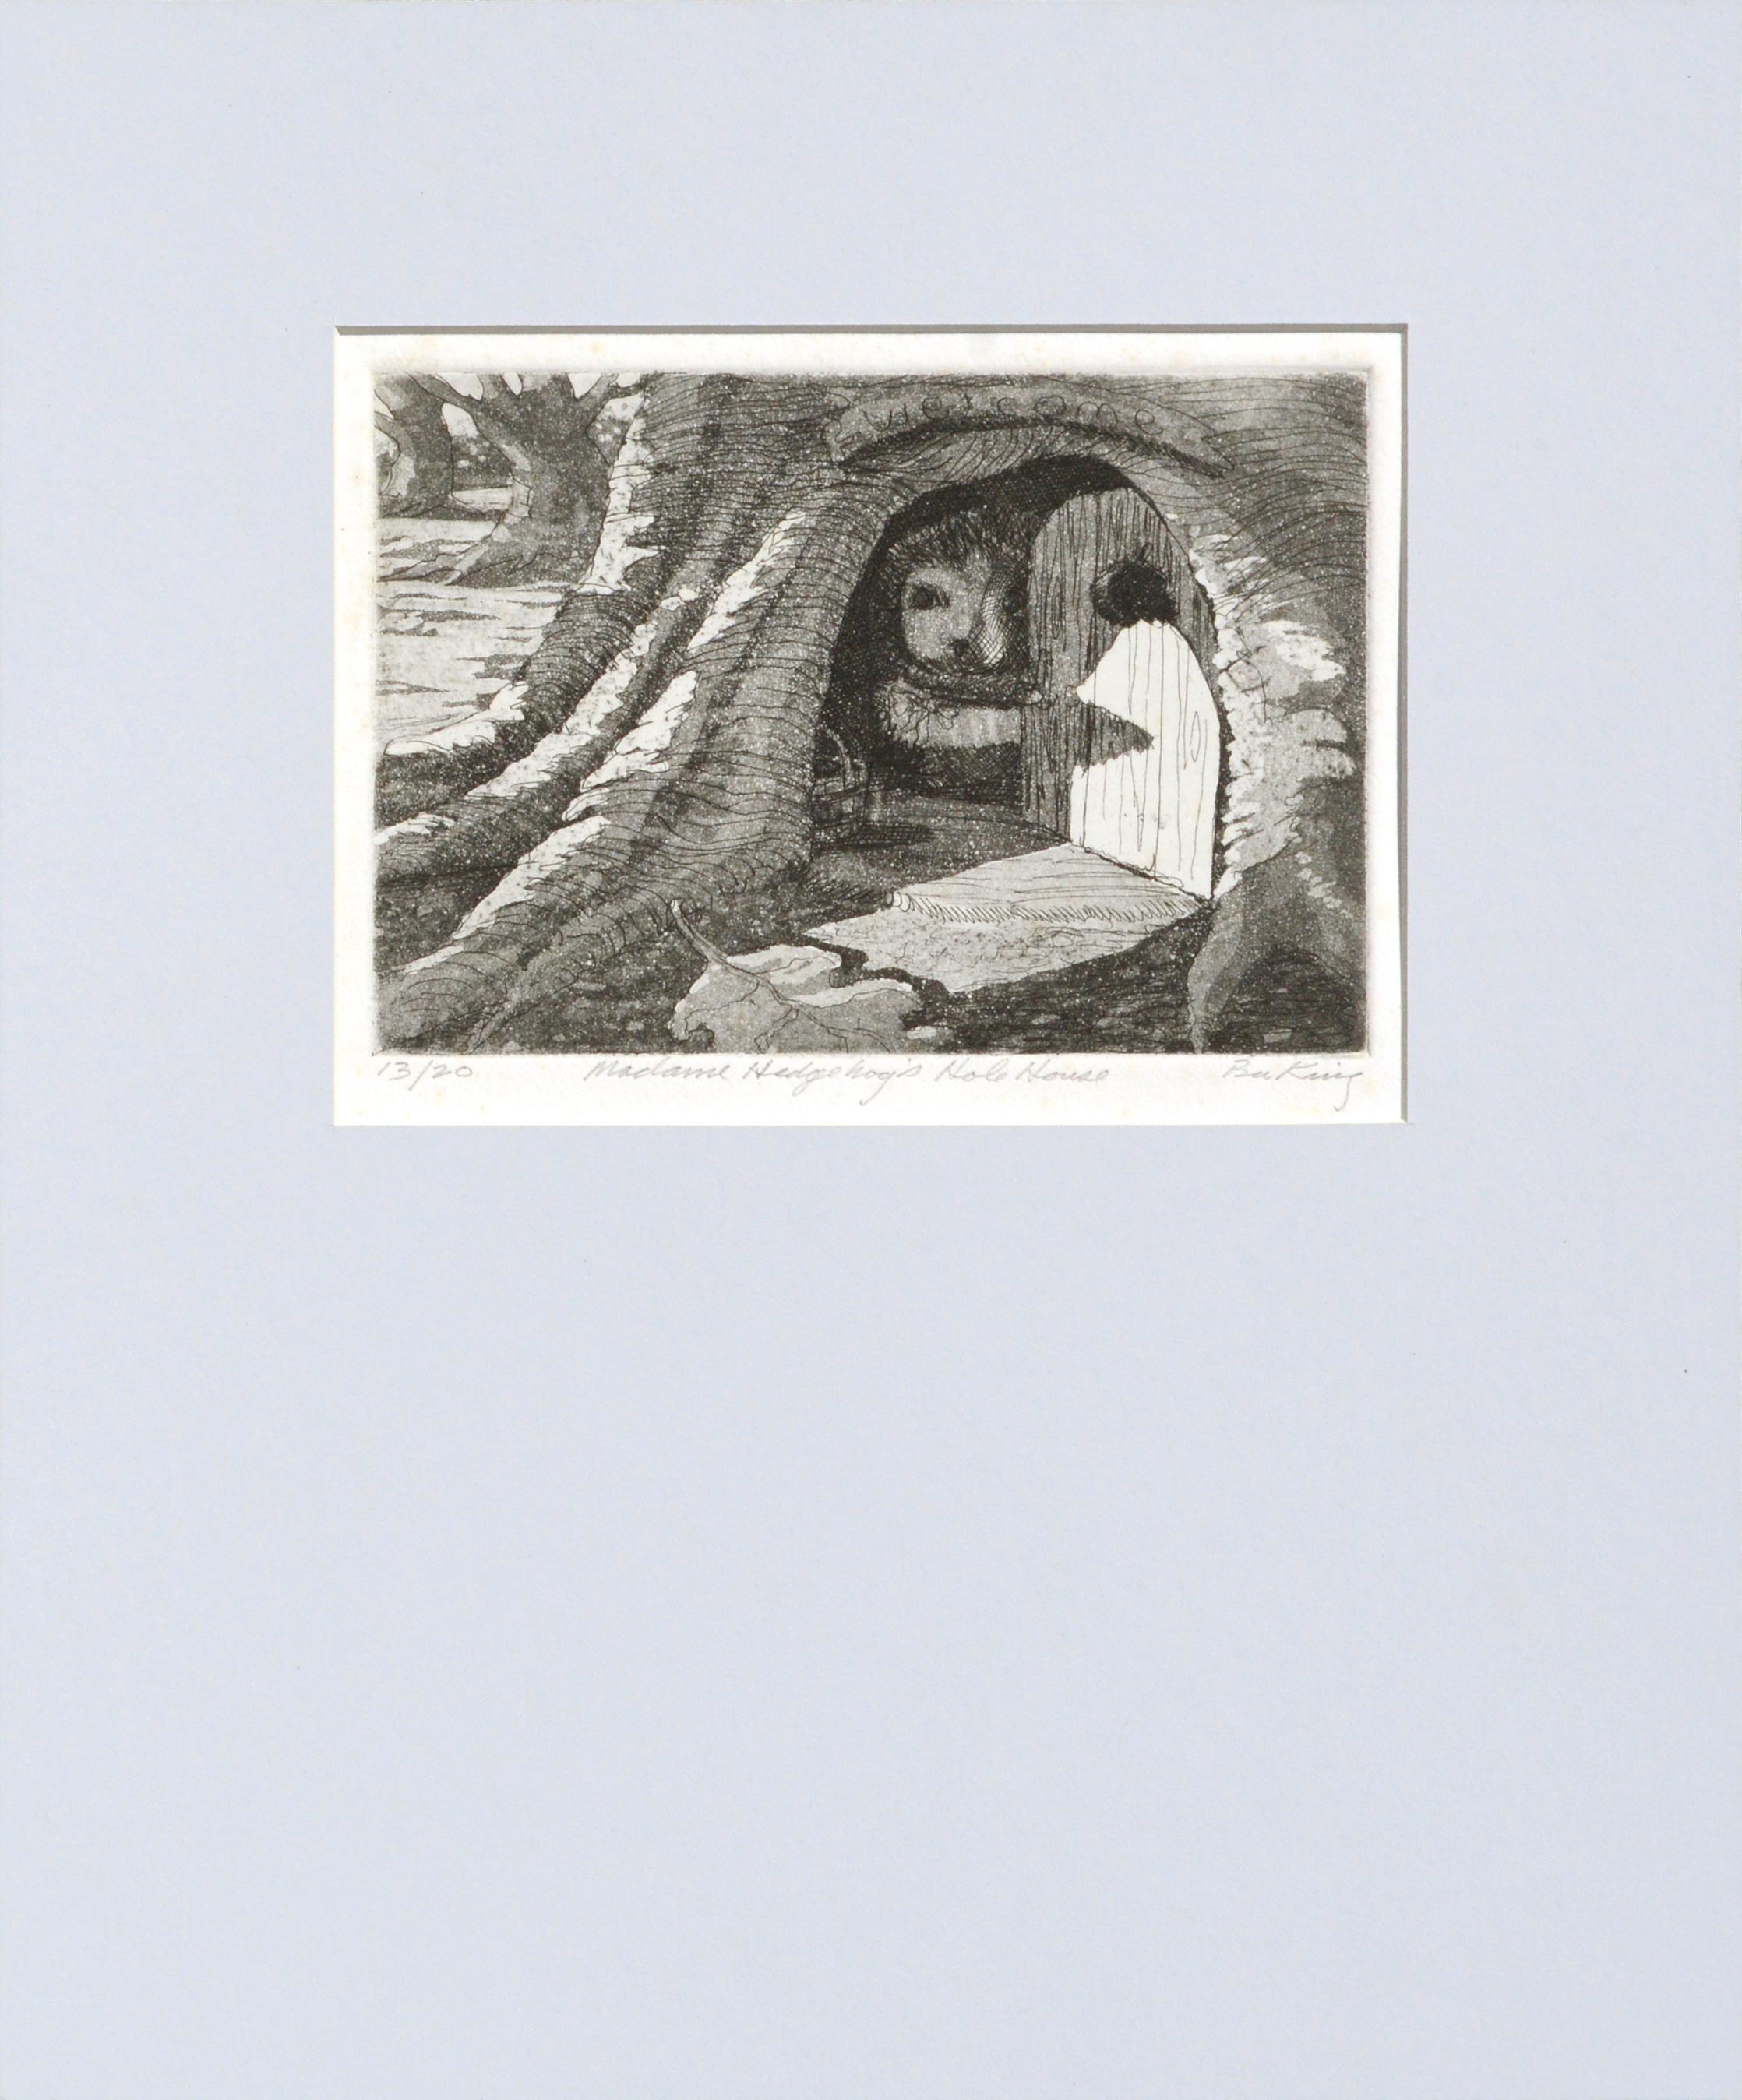 "Madame Hedgehog's Hole House", Whimsical Children's Drypoint Etching